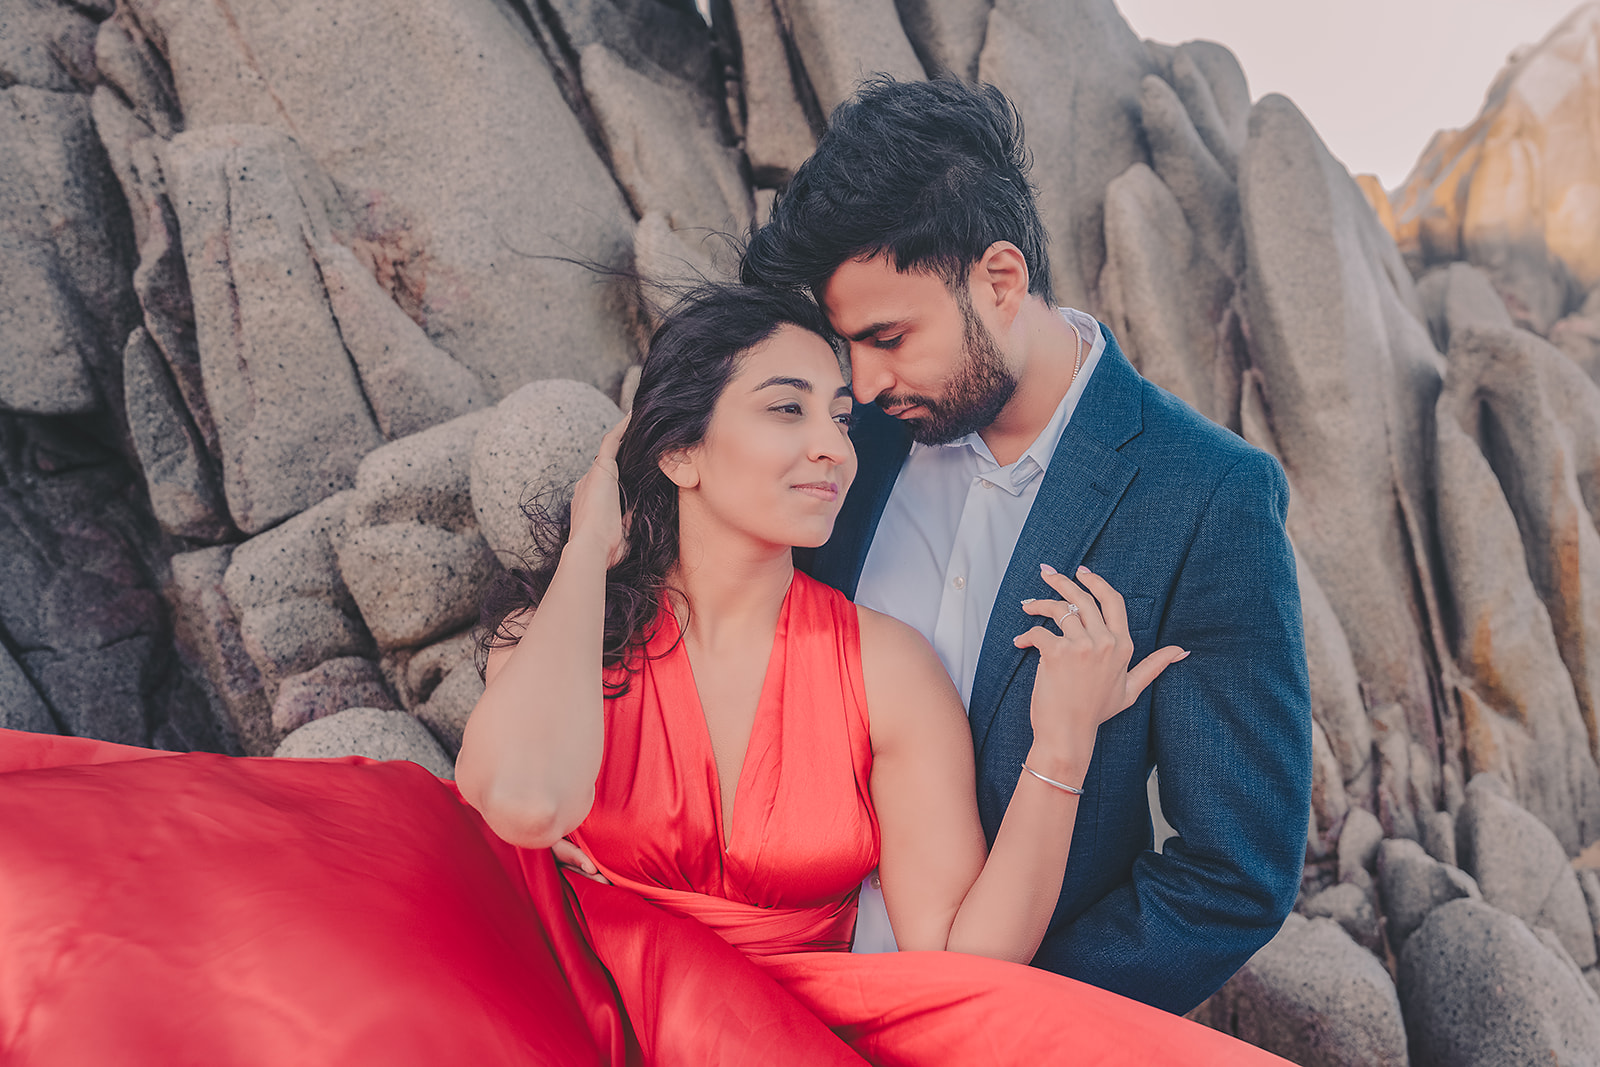 Los Cabos beach engagement photo shoot in red dress